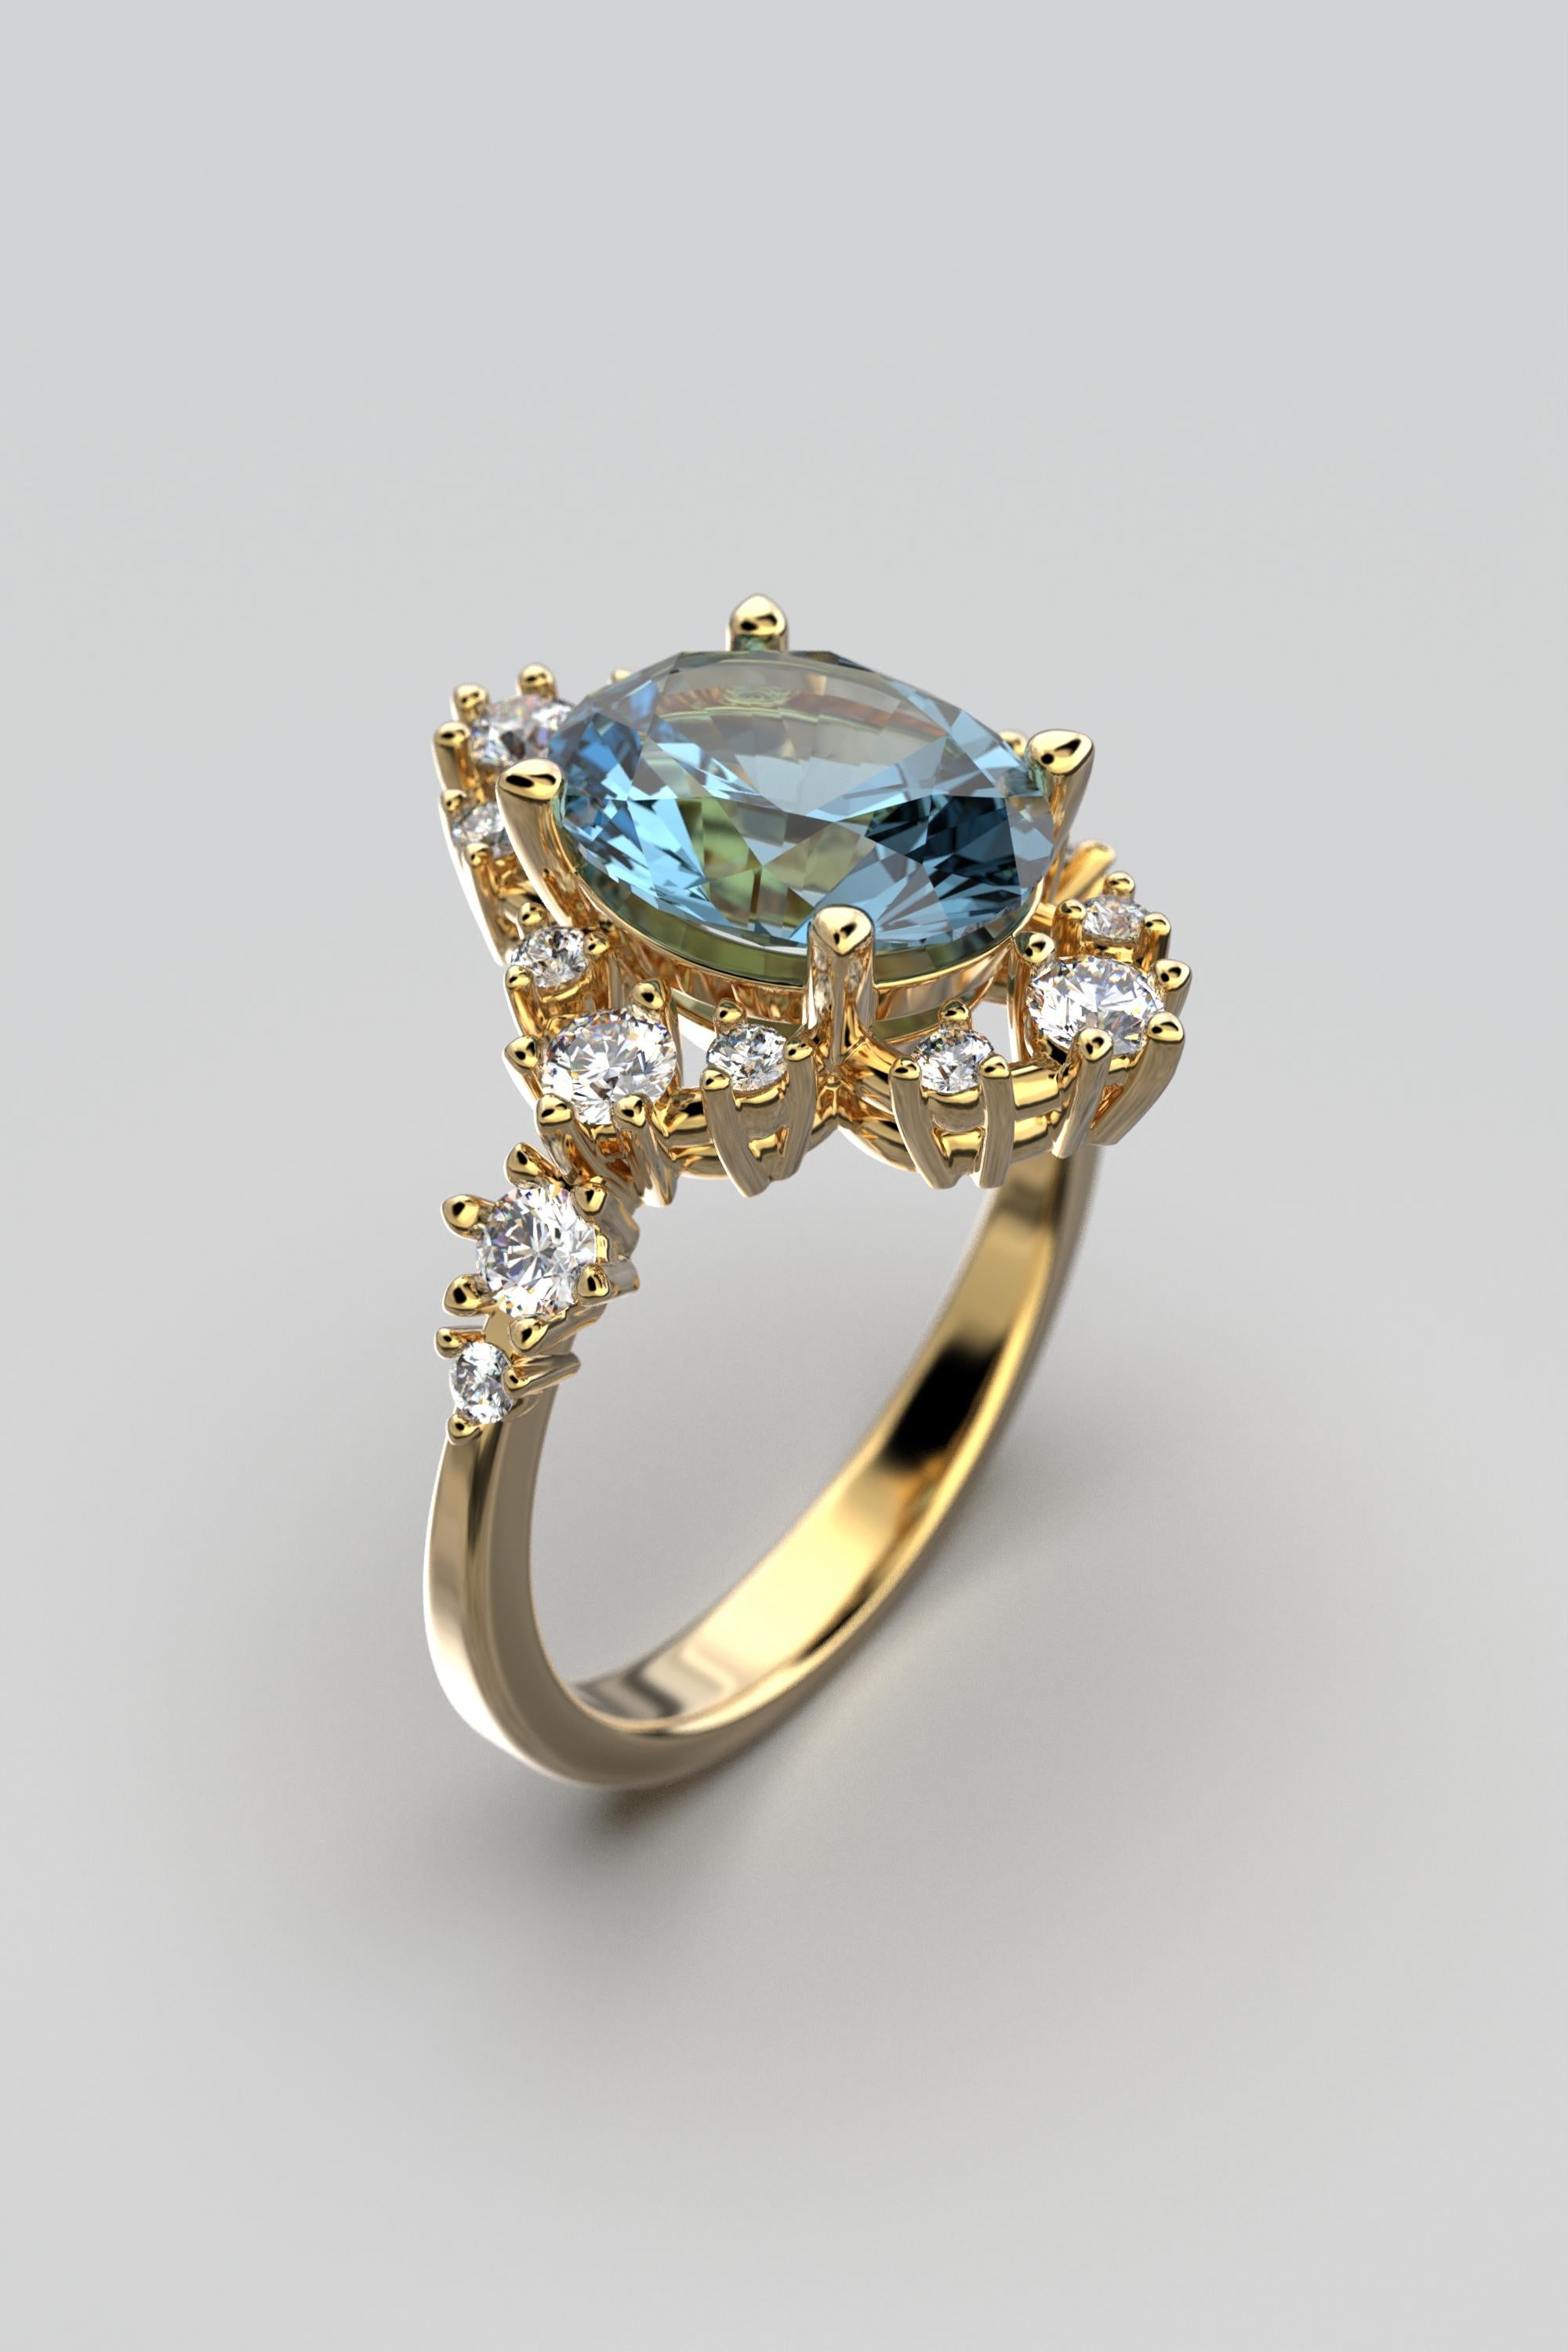 For Sale:  18k Gold Aquamarine Ring With Natural Diamonds Made in Italy Oltremare Gioielli 13